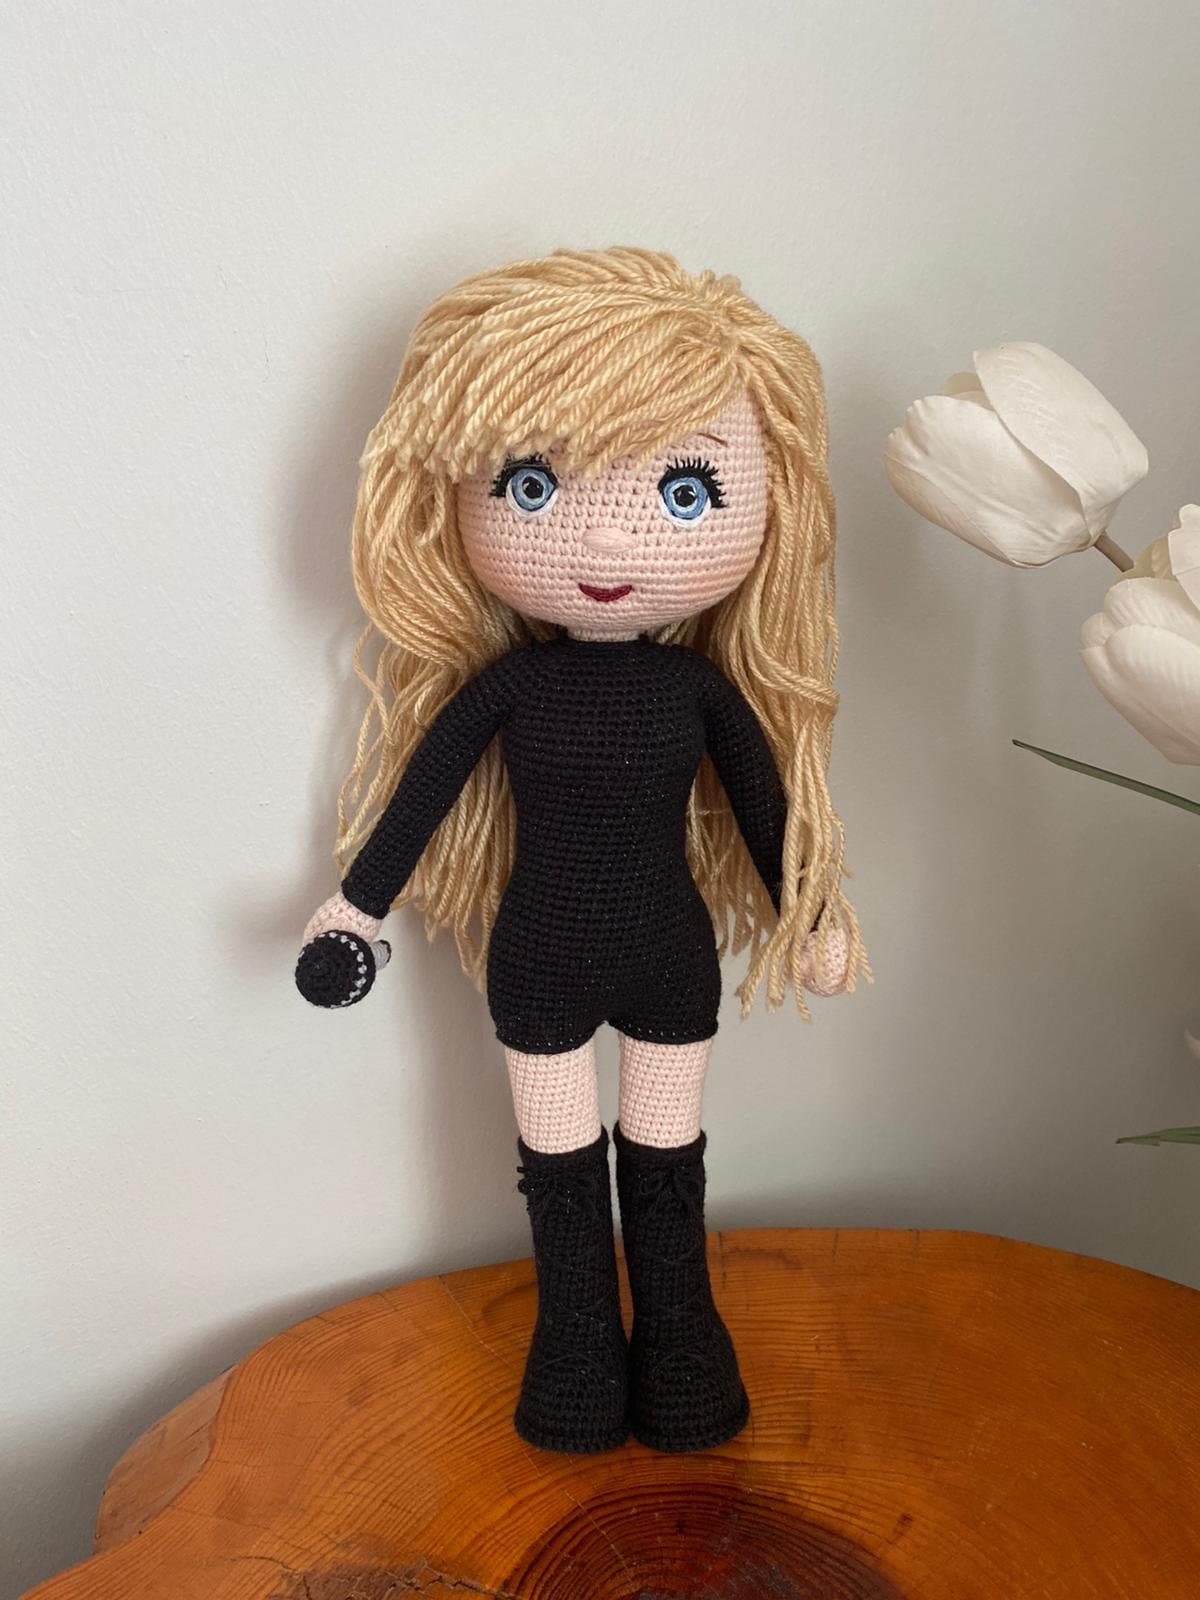  Unofficial Taylor Swift Crochet Kit: Includes Everything to  Make a Taylor Swift Amigurumi Doll!: 9780785844181: Galusz, Katalin: Books